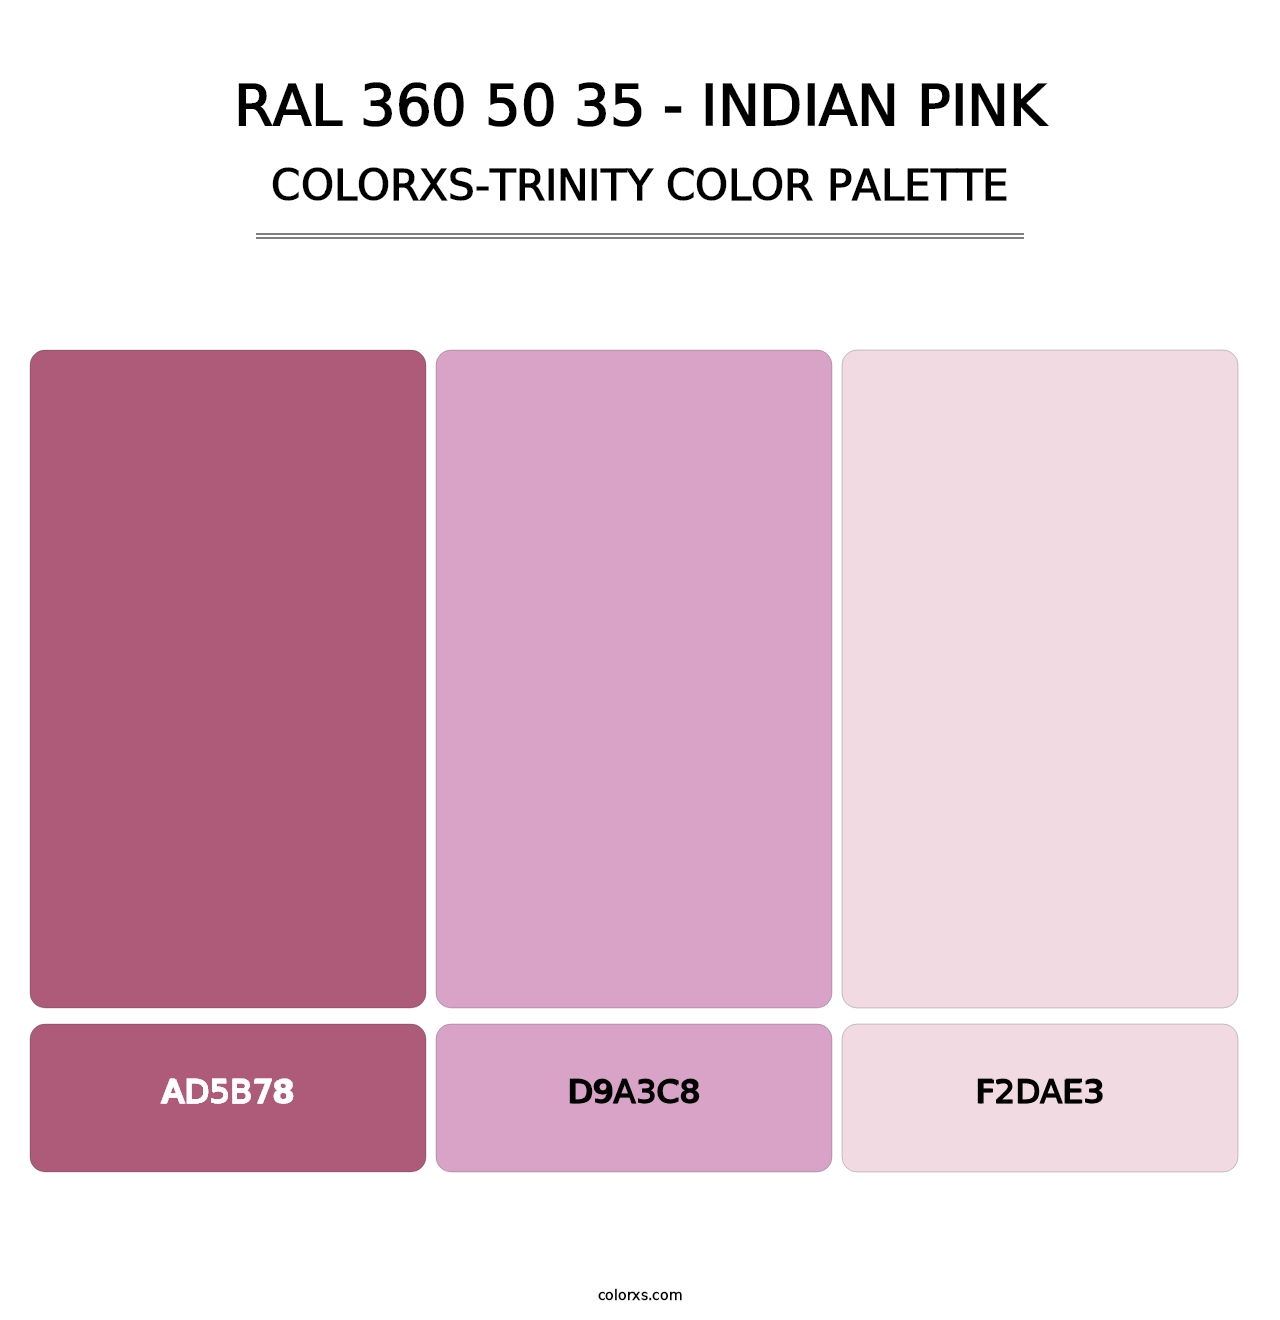 RAL 360 50 35 - Indian Pink - Colorxs Trinity Palette